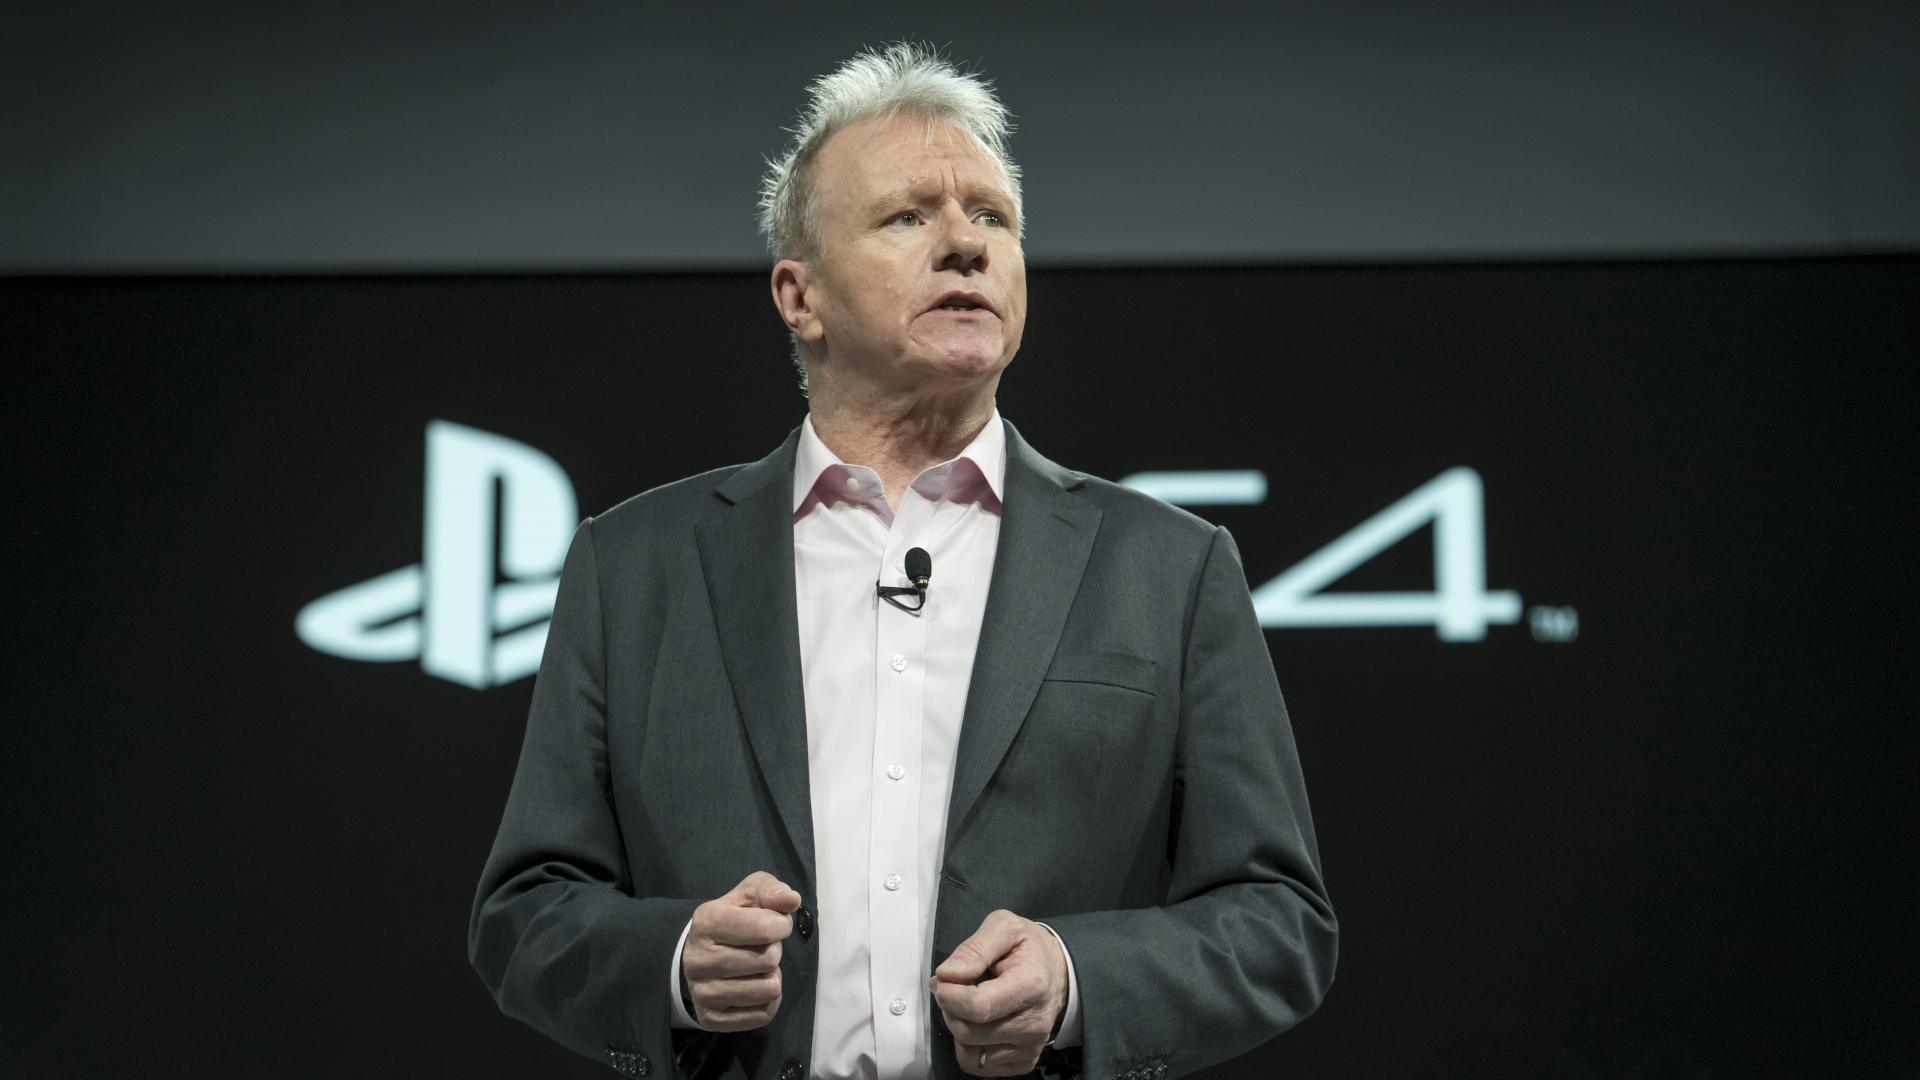  PlayStation president faces backlash after refusing to take a stance on abortion rights 